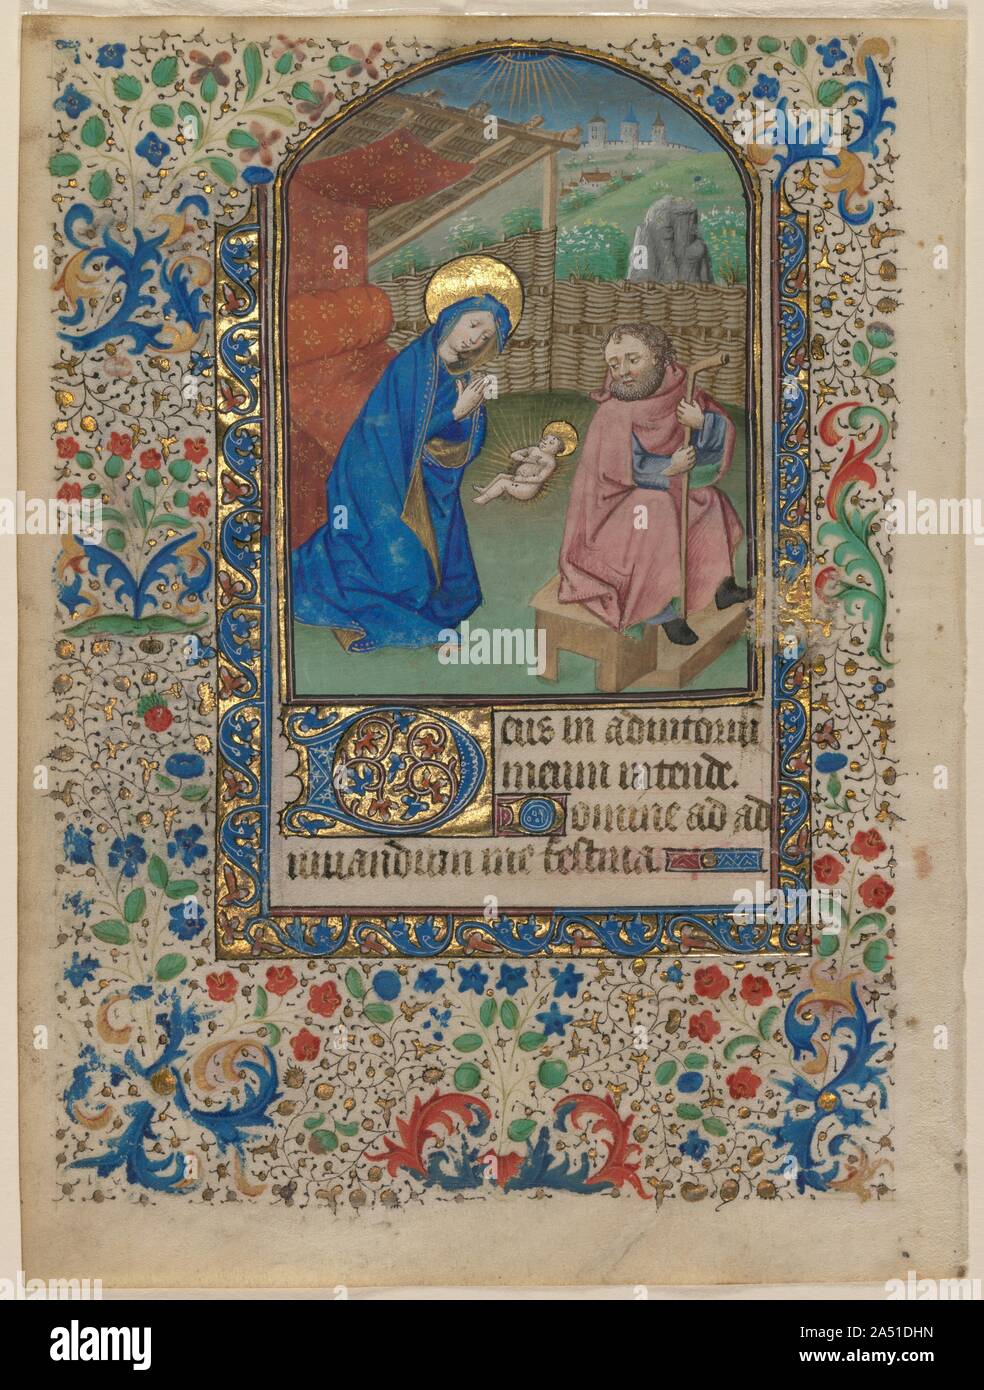 Leaf from a Book of Hours: The Nativity (recto) and Text (verso), c. 1430. Representing God's entry into the world, the Nativity remains one of medieval painting's most poignant Christian images. In the Gospels, only Matthew and Luke directly described this event. Perhaps the brevity and absence of detail in these texts allowed artists to devote so much creativity to amplifying the Christmas story. This miniature's simplicity makes it compelling. Only the three principals&#x2014;Mary, Joseph, and the newly born Christ Child&#x2014;appear in the scene. The Virgin kneels before an elegant canopi Stock Photo